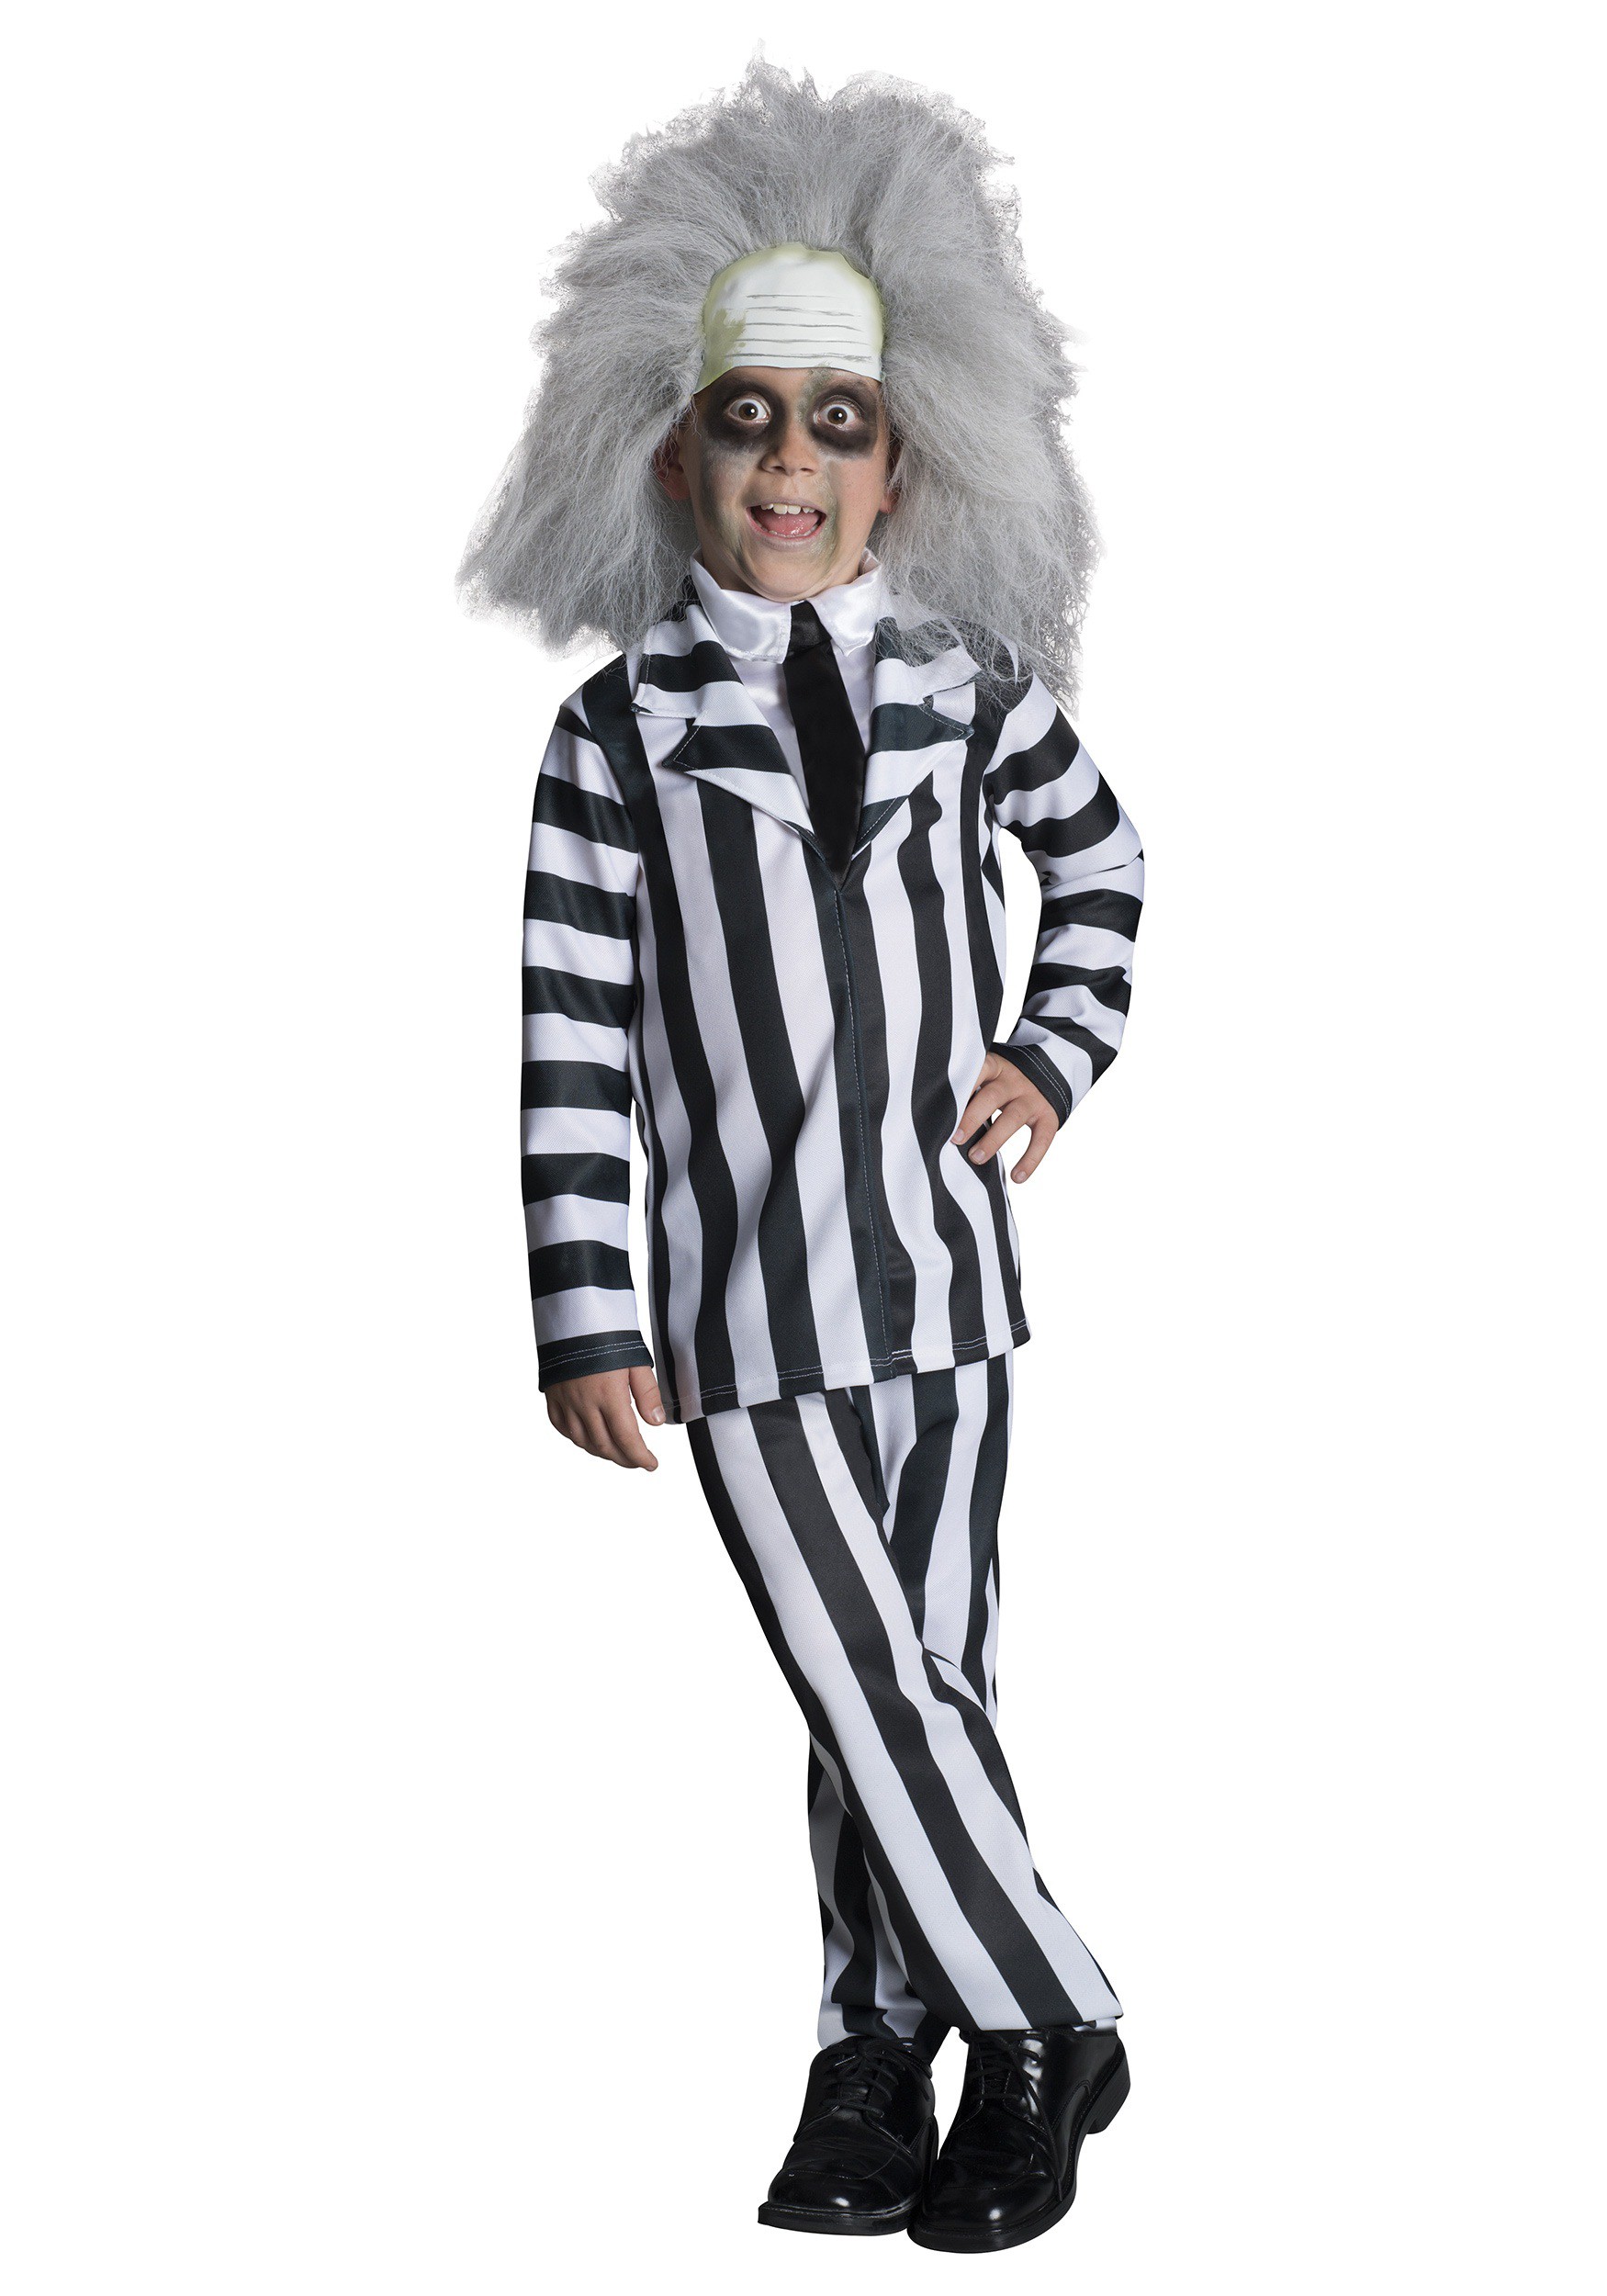 Photos - Fancy Dress Rubies Costume Co. Inc Deluxe Beetlejuice Costume for kids Black/White 